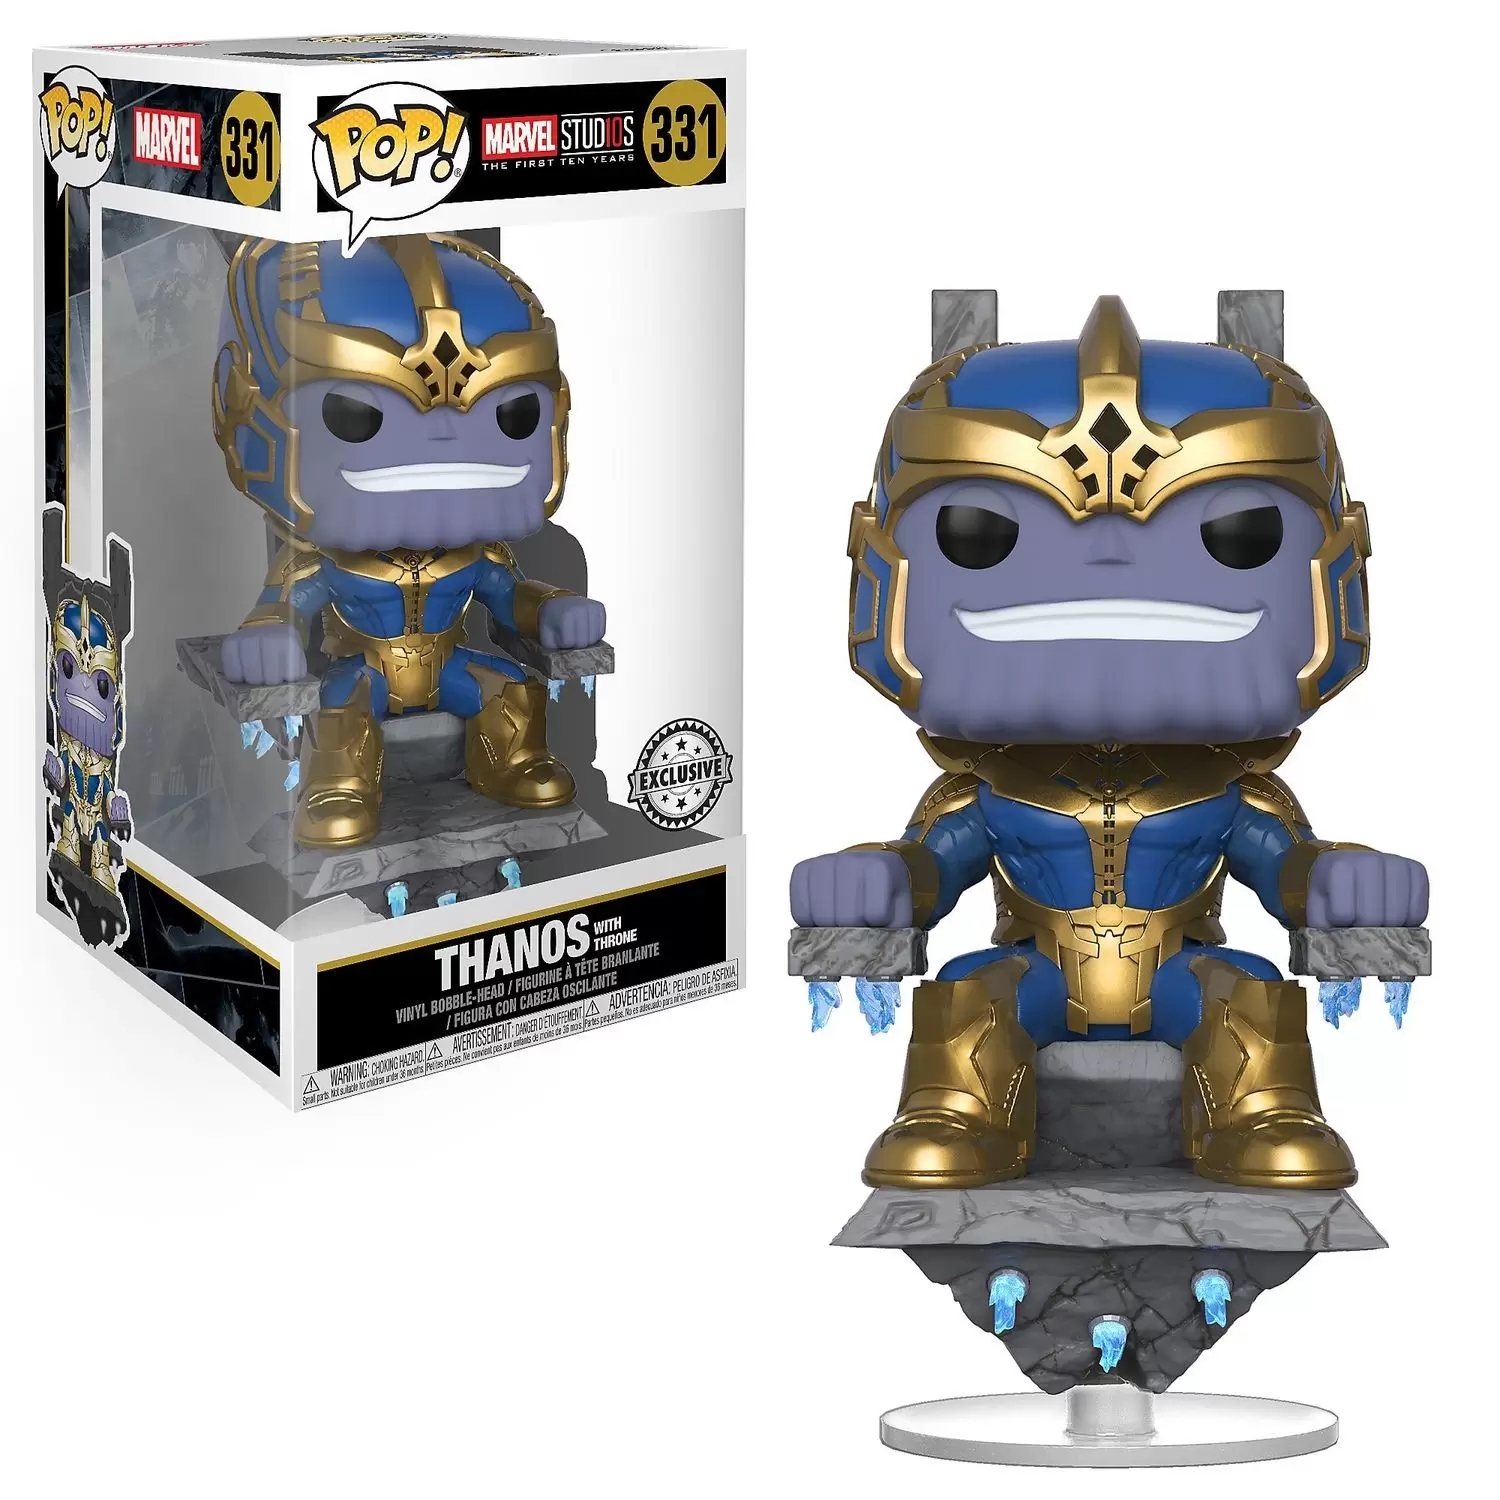 POP! MARVEL - Marvel Studios The First Ten Years - Thanos with Throne